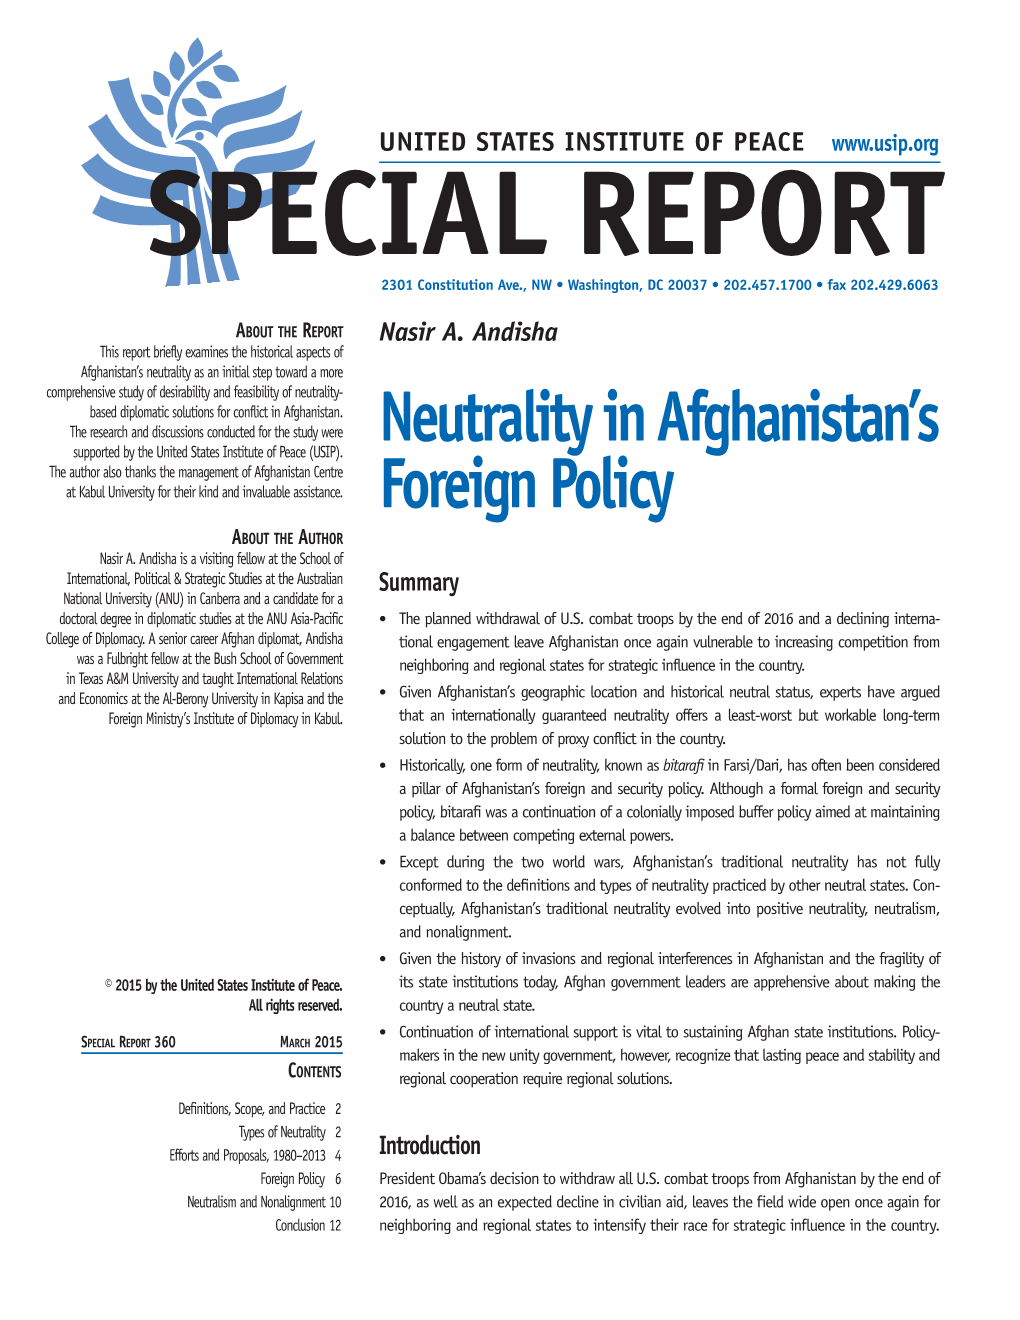 Neutrality in Afghanistan's Foreign Policy